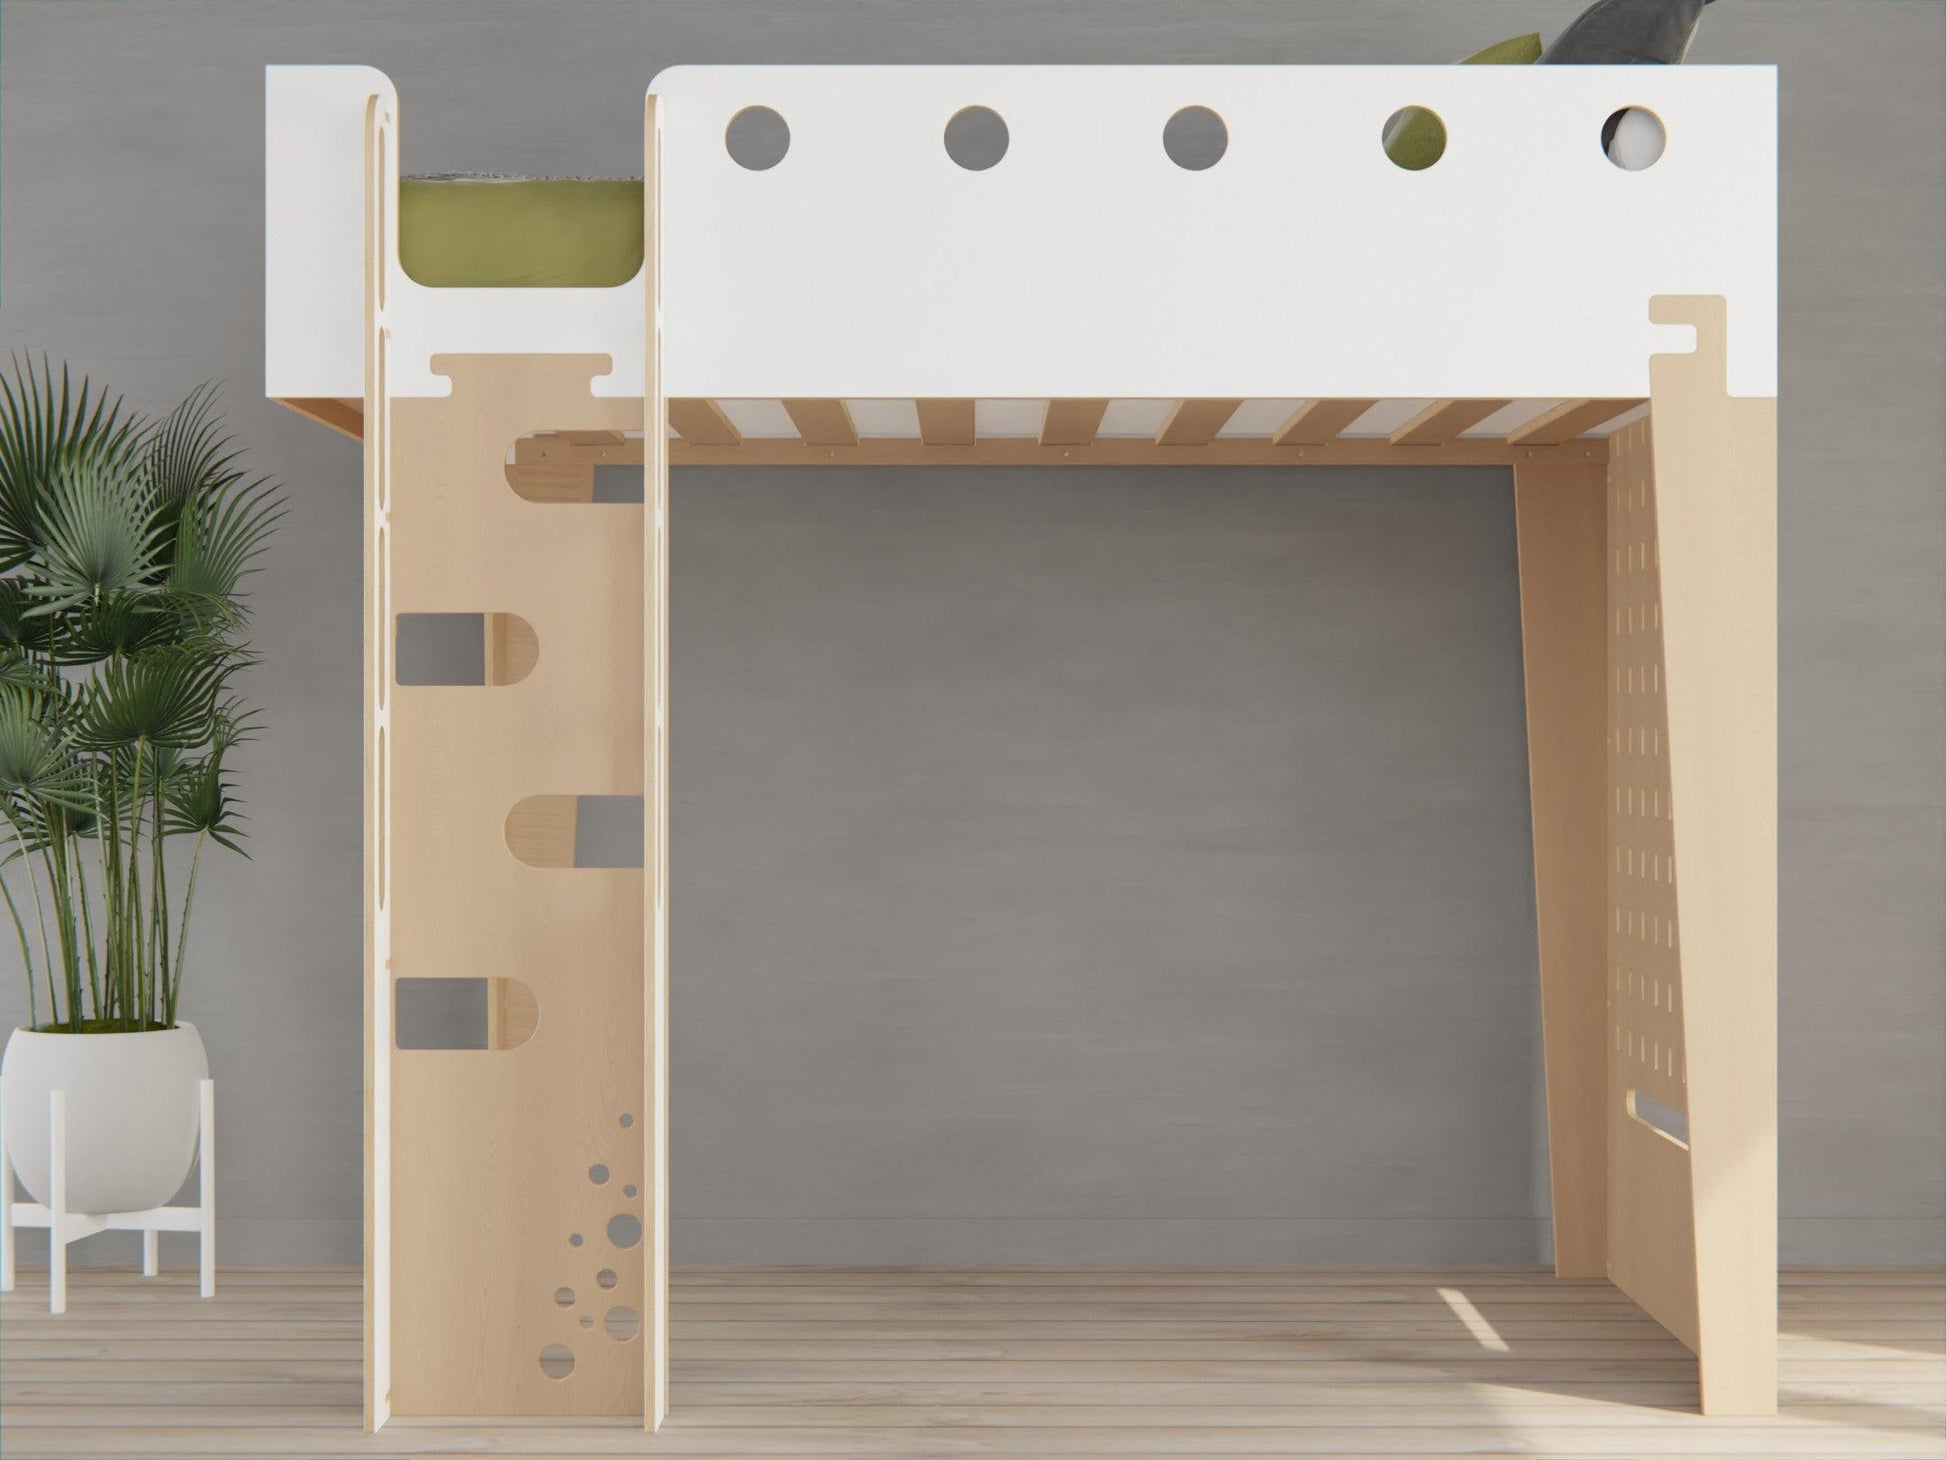 Experience the blend of rest and study with our versatile white plywood loft bed with a desk."